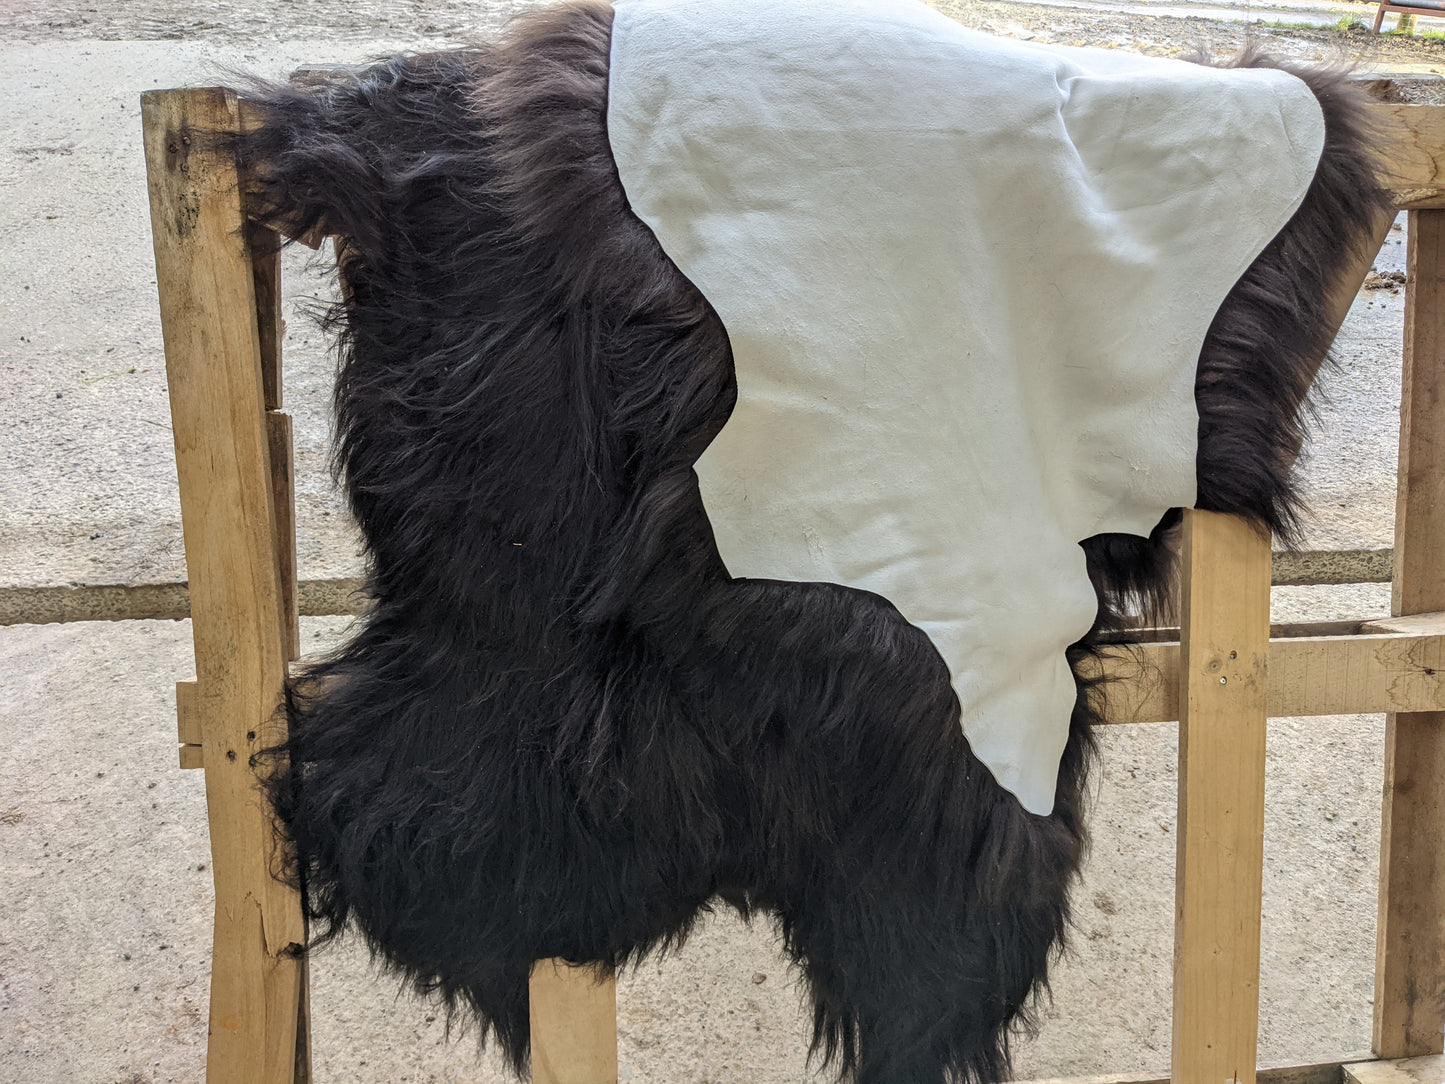 2 rugs side by side, showing the front and back of a Close up of the 6 inch fur on Black Sheepskin Rug